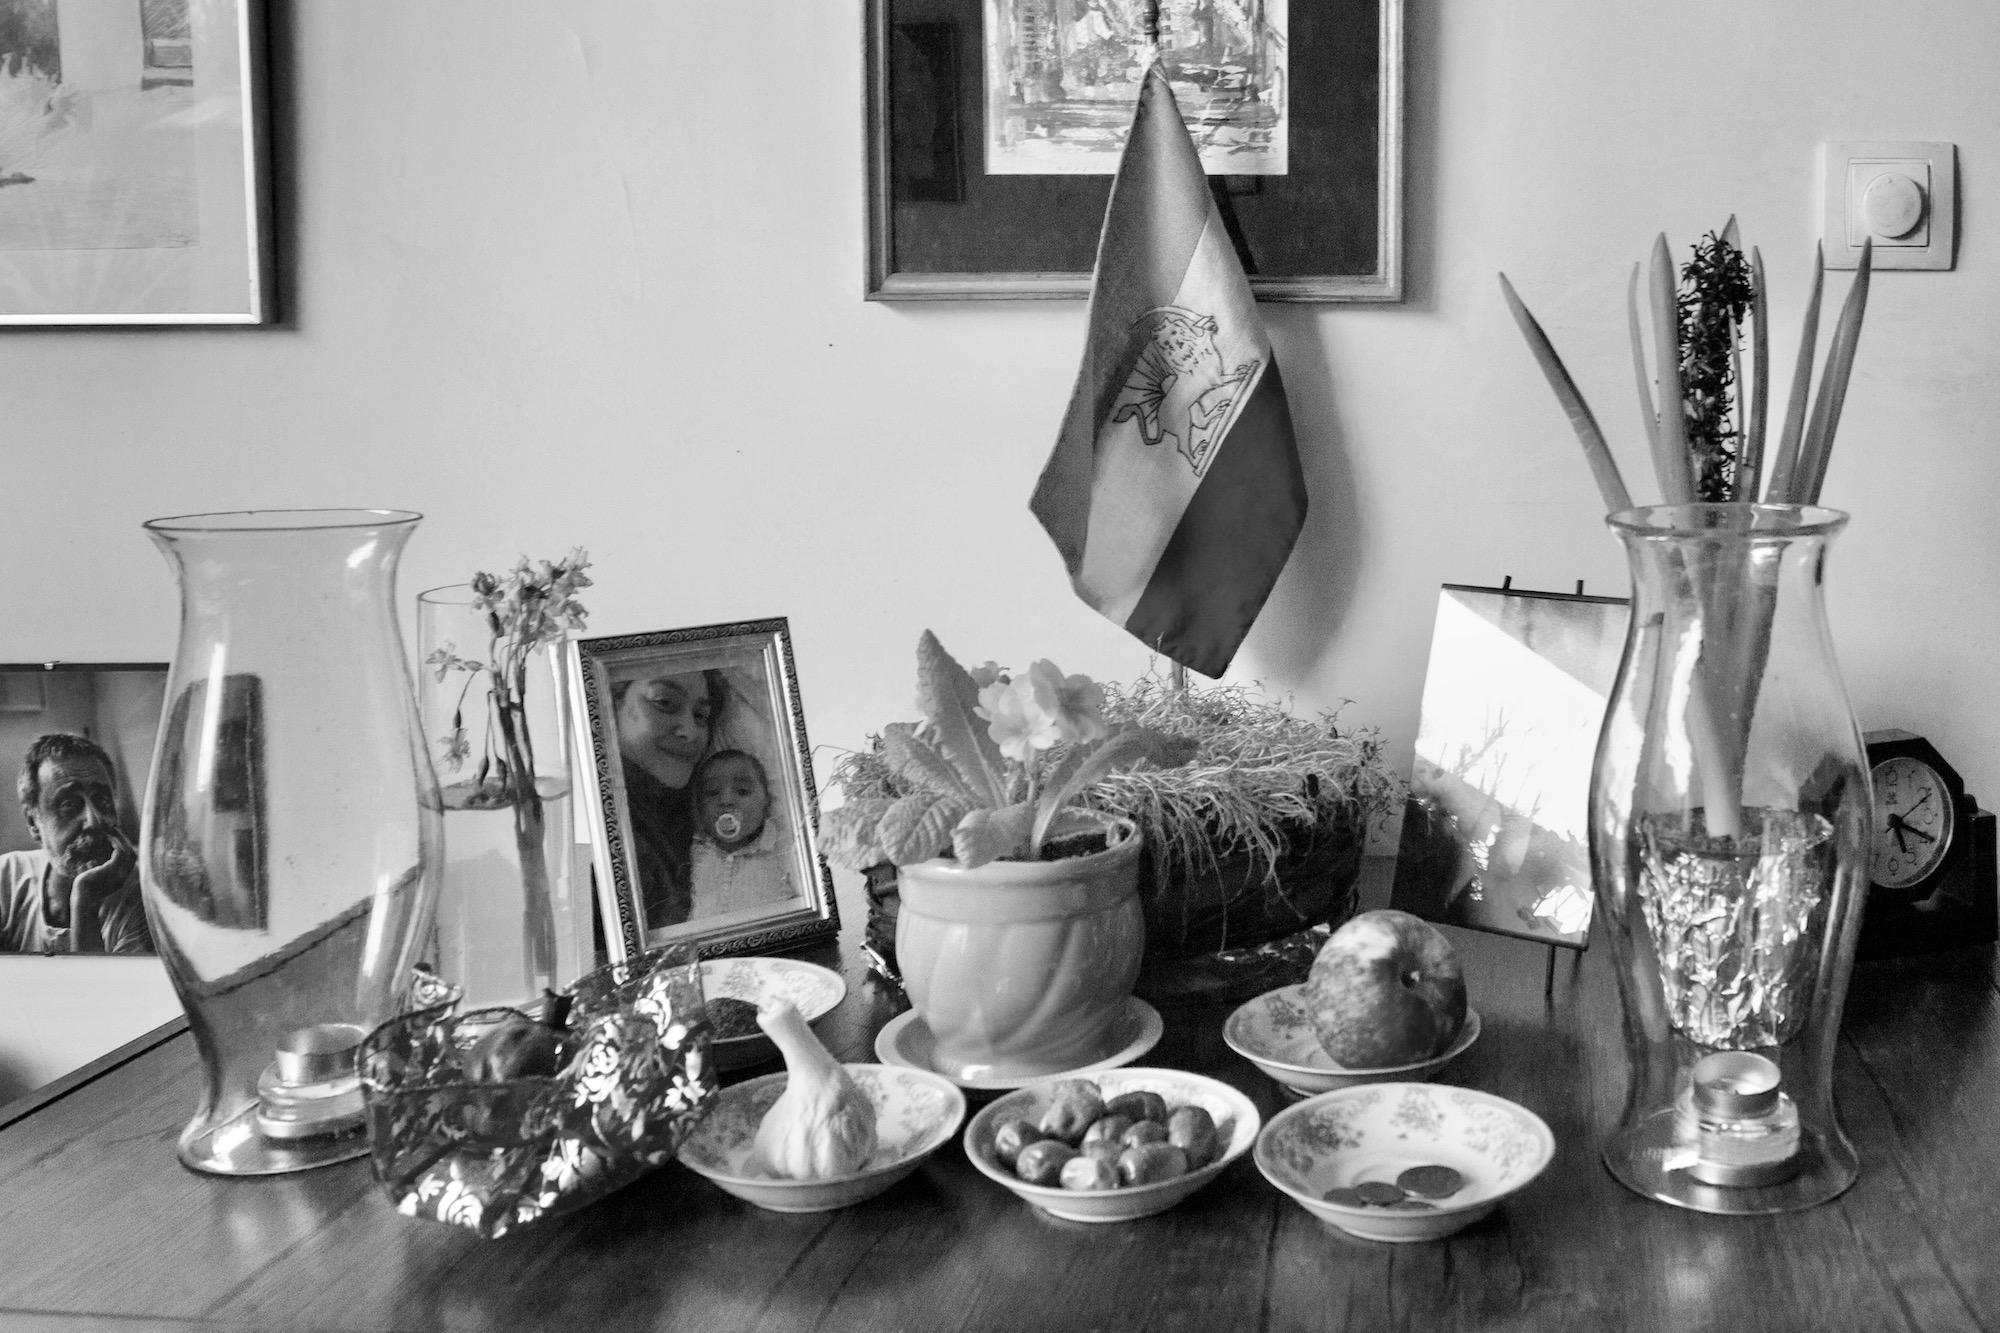 Iraniyat ("being Iranian") -    The table of the Persian New Year in an Iranian house....